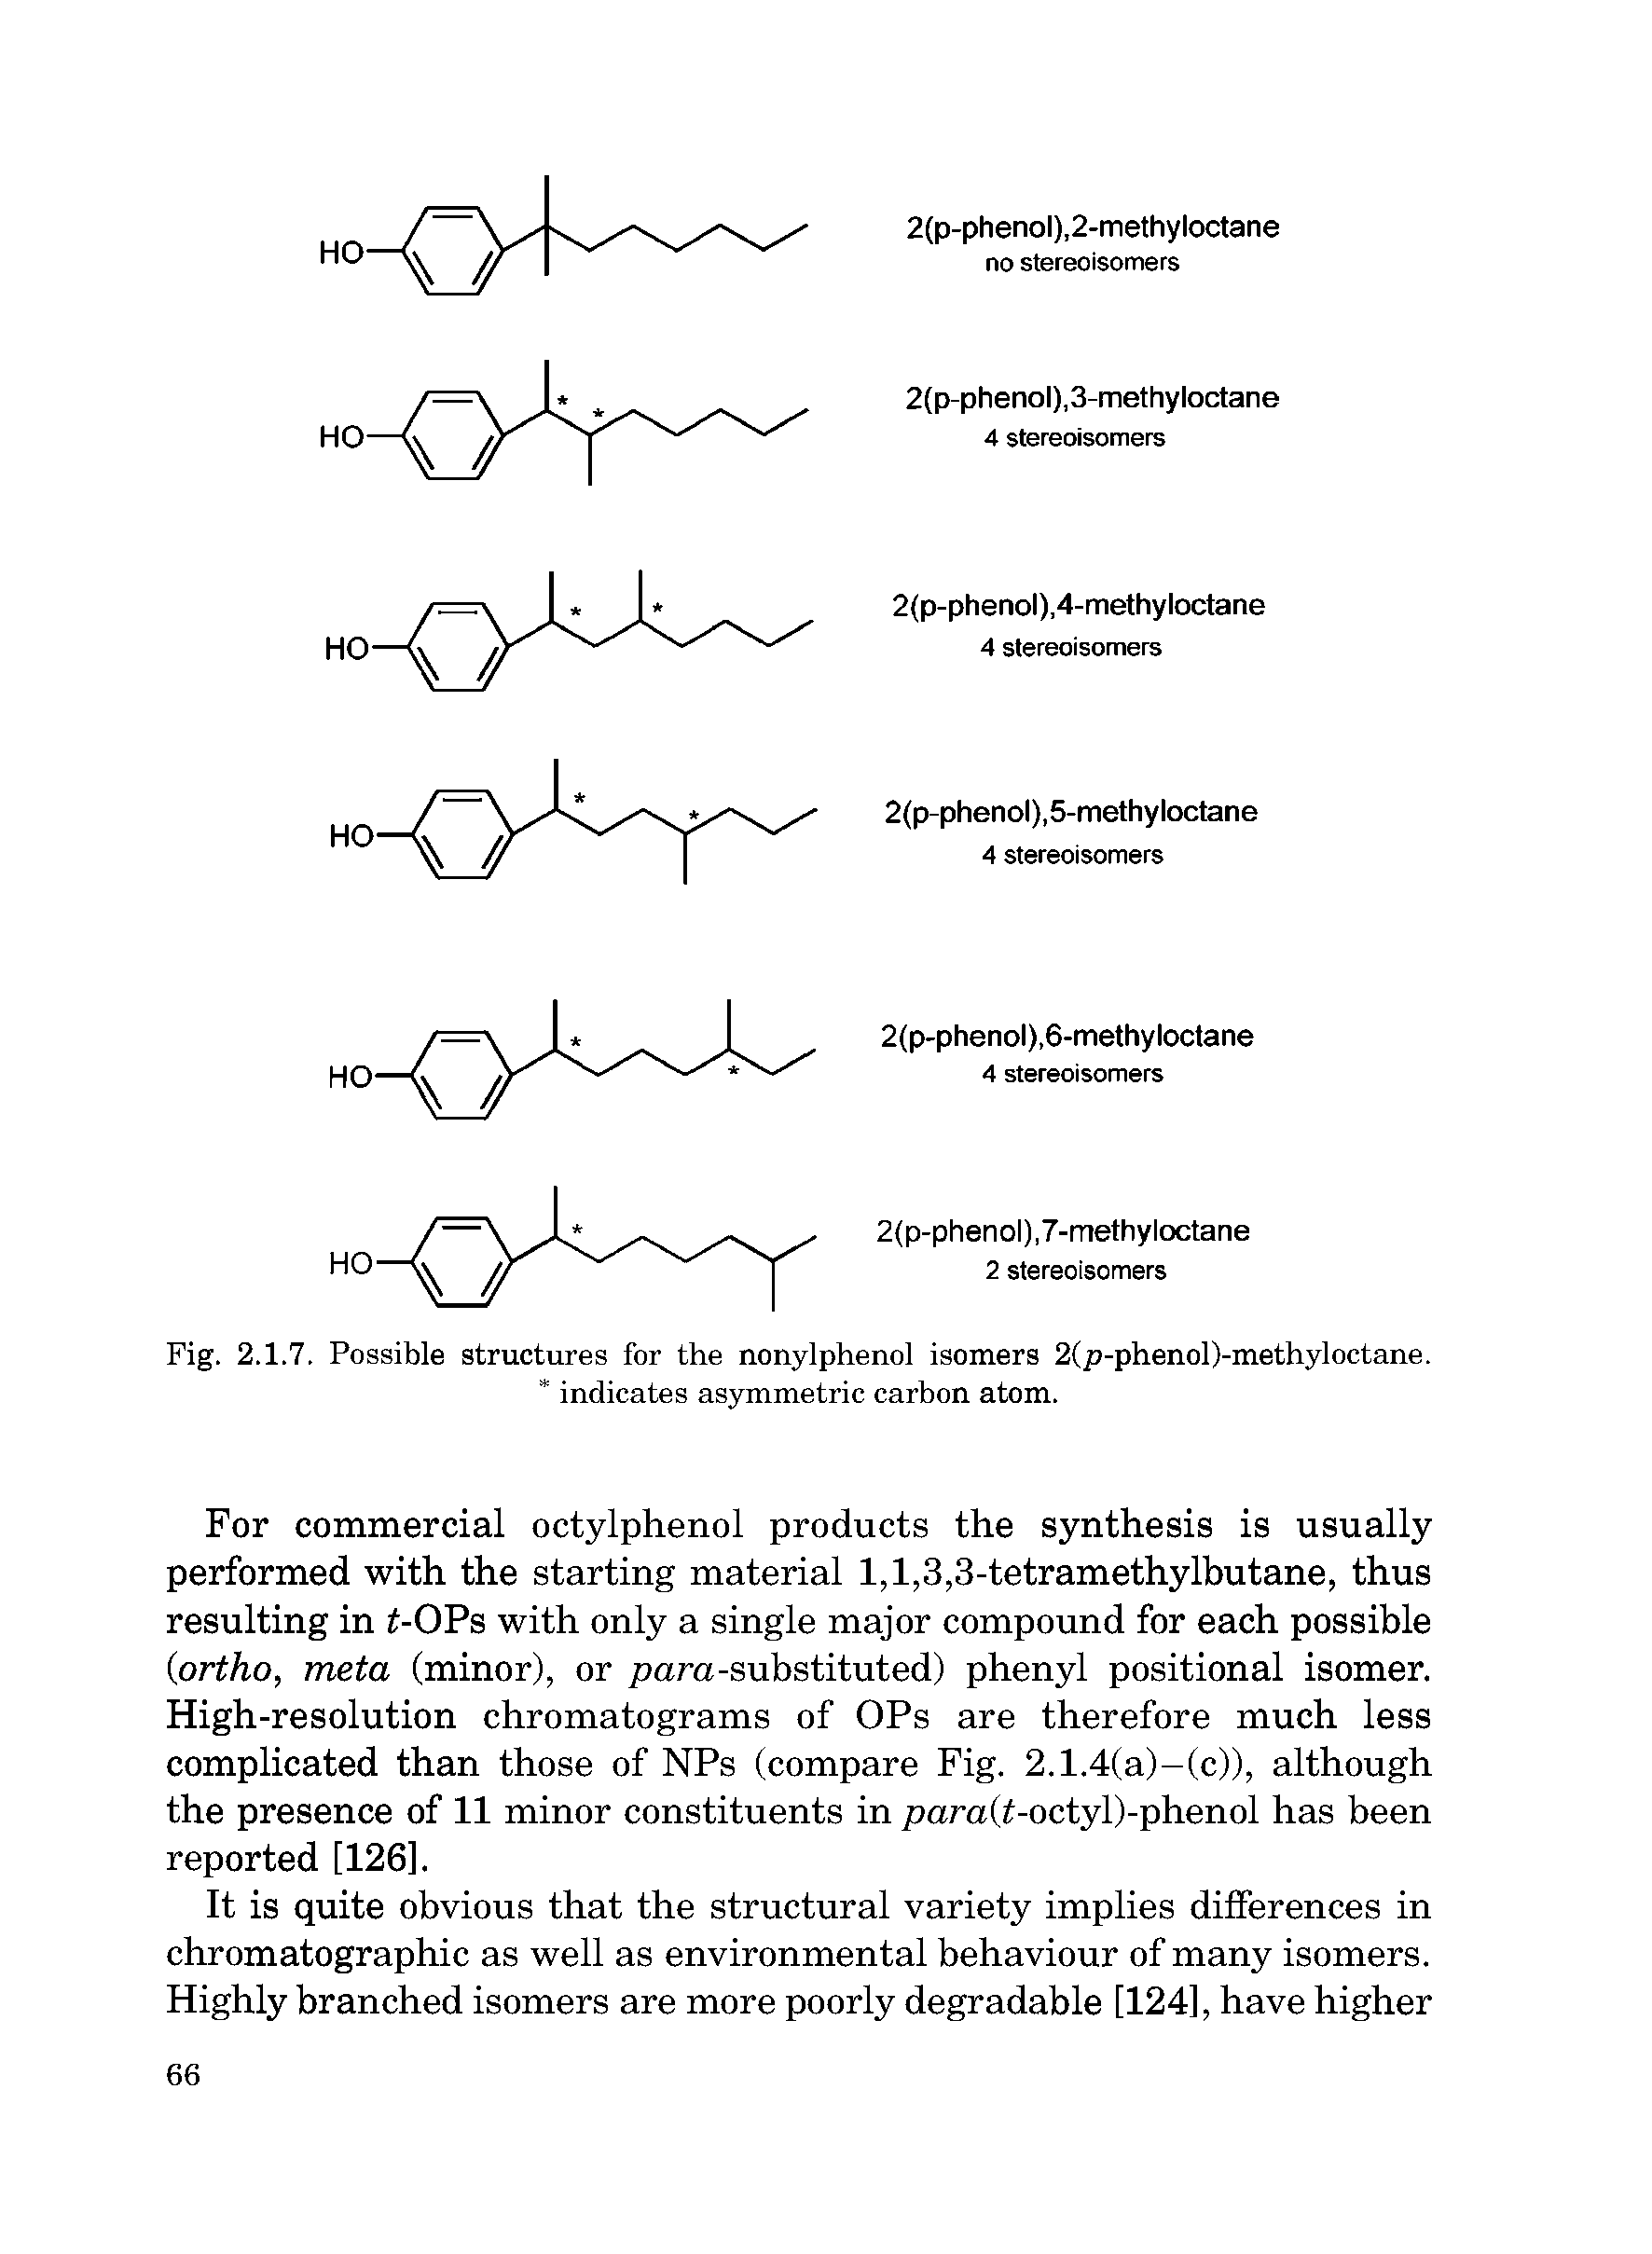 Fig. 2.1.7. Possible structures for the nonylphenol isomers 2(p-phenol)-methyloctane. indicates asymmetric carbon atom.